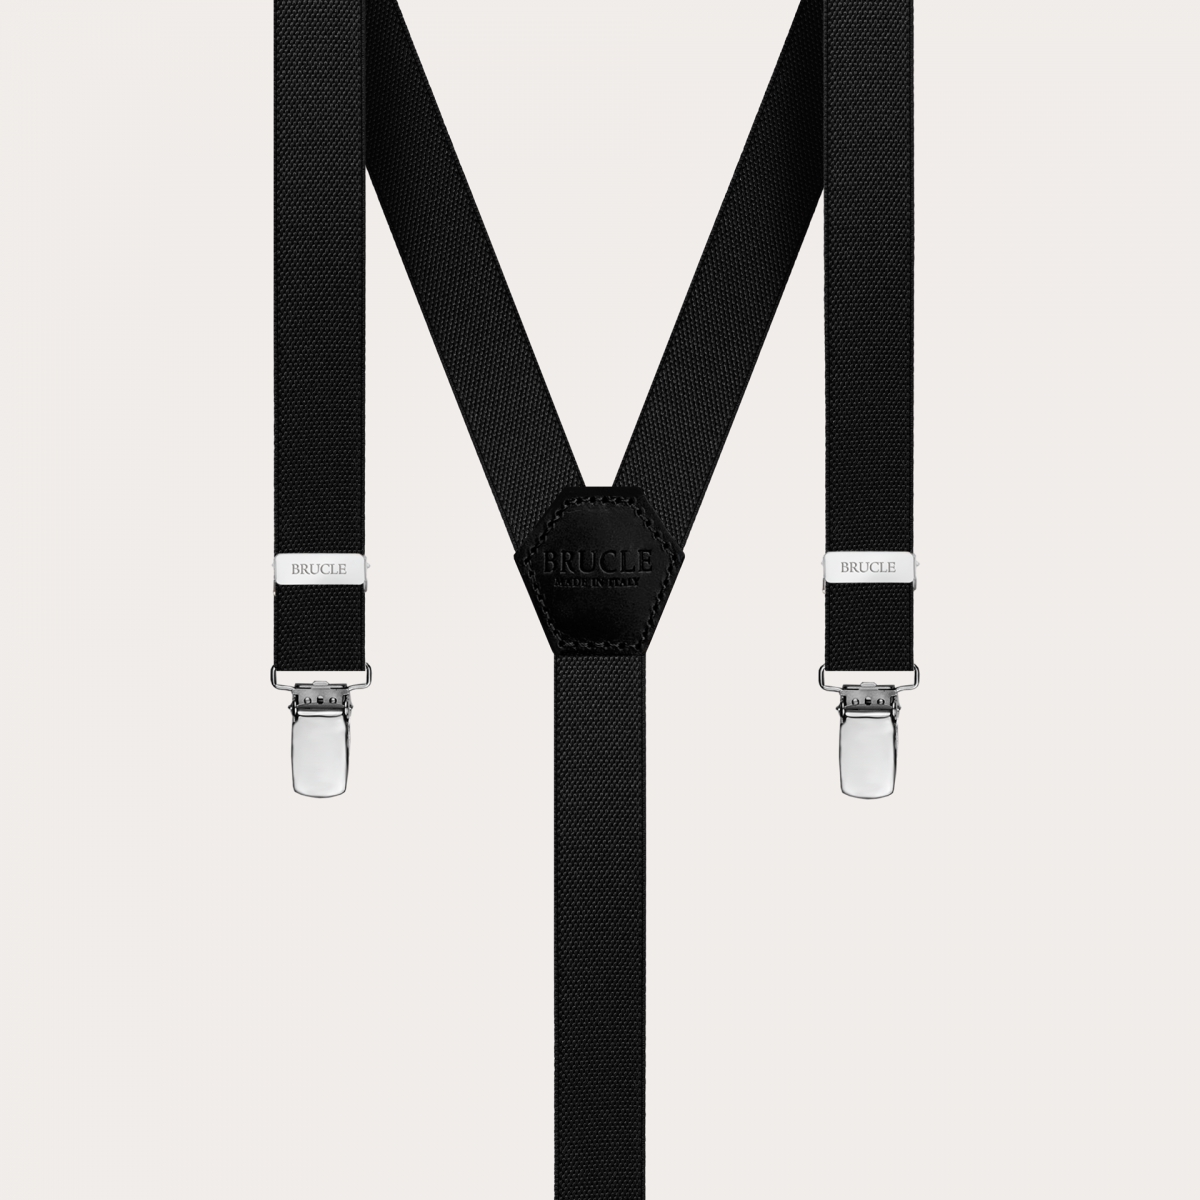 Thin Y suspenders for men and women, black